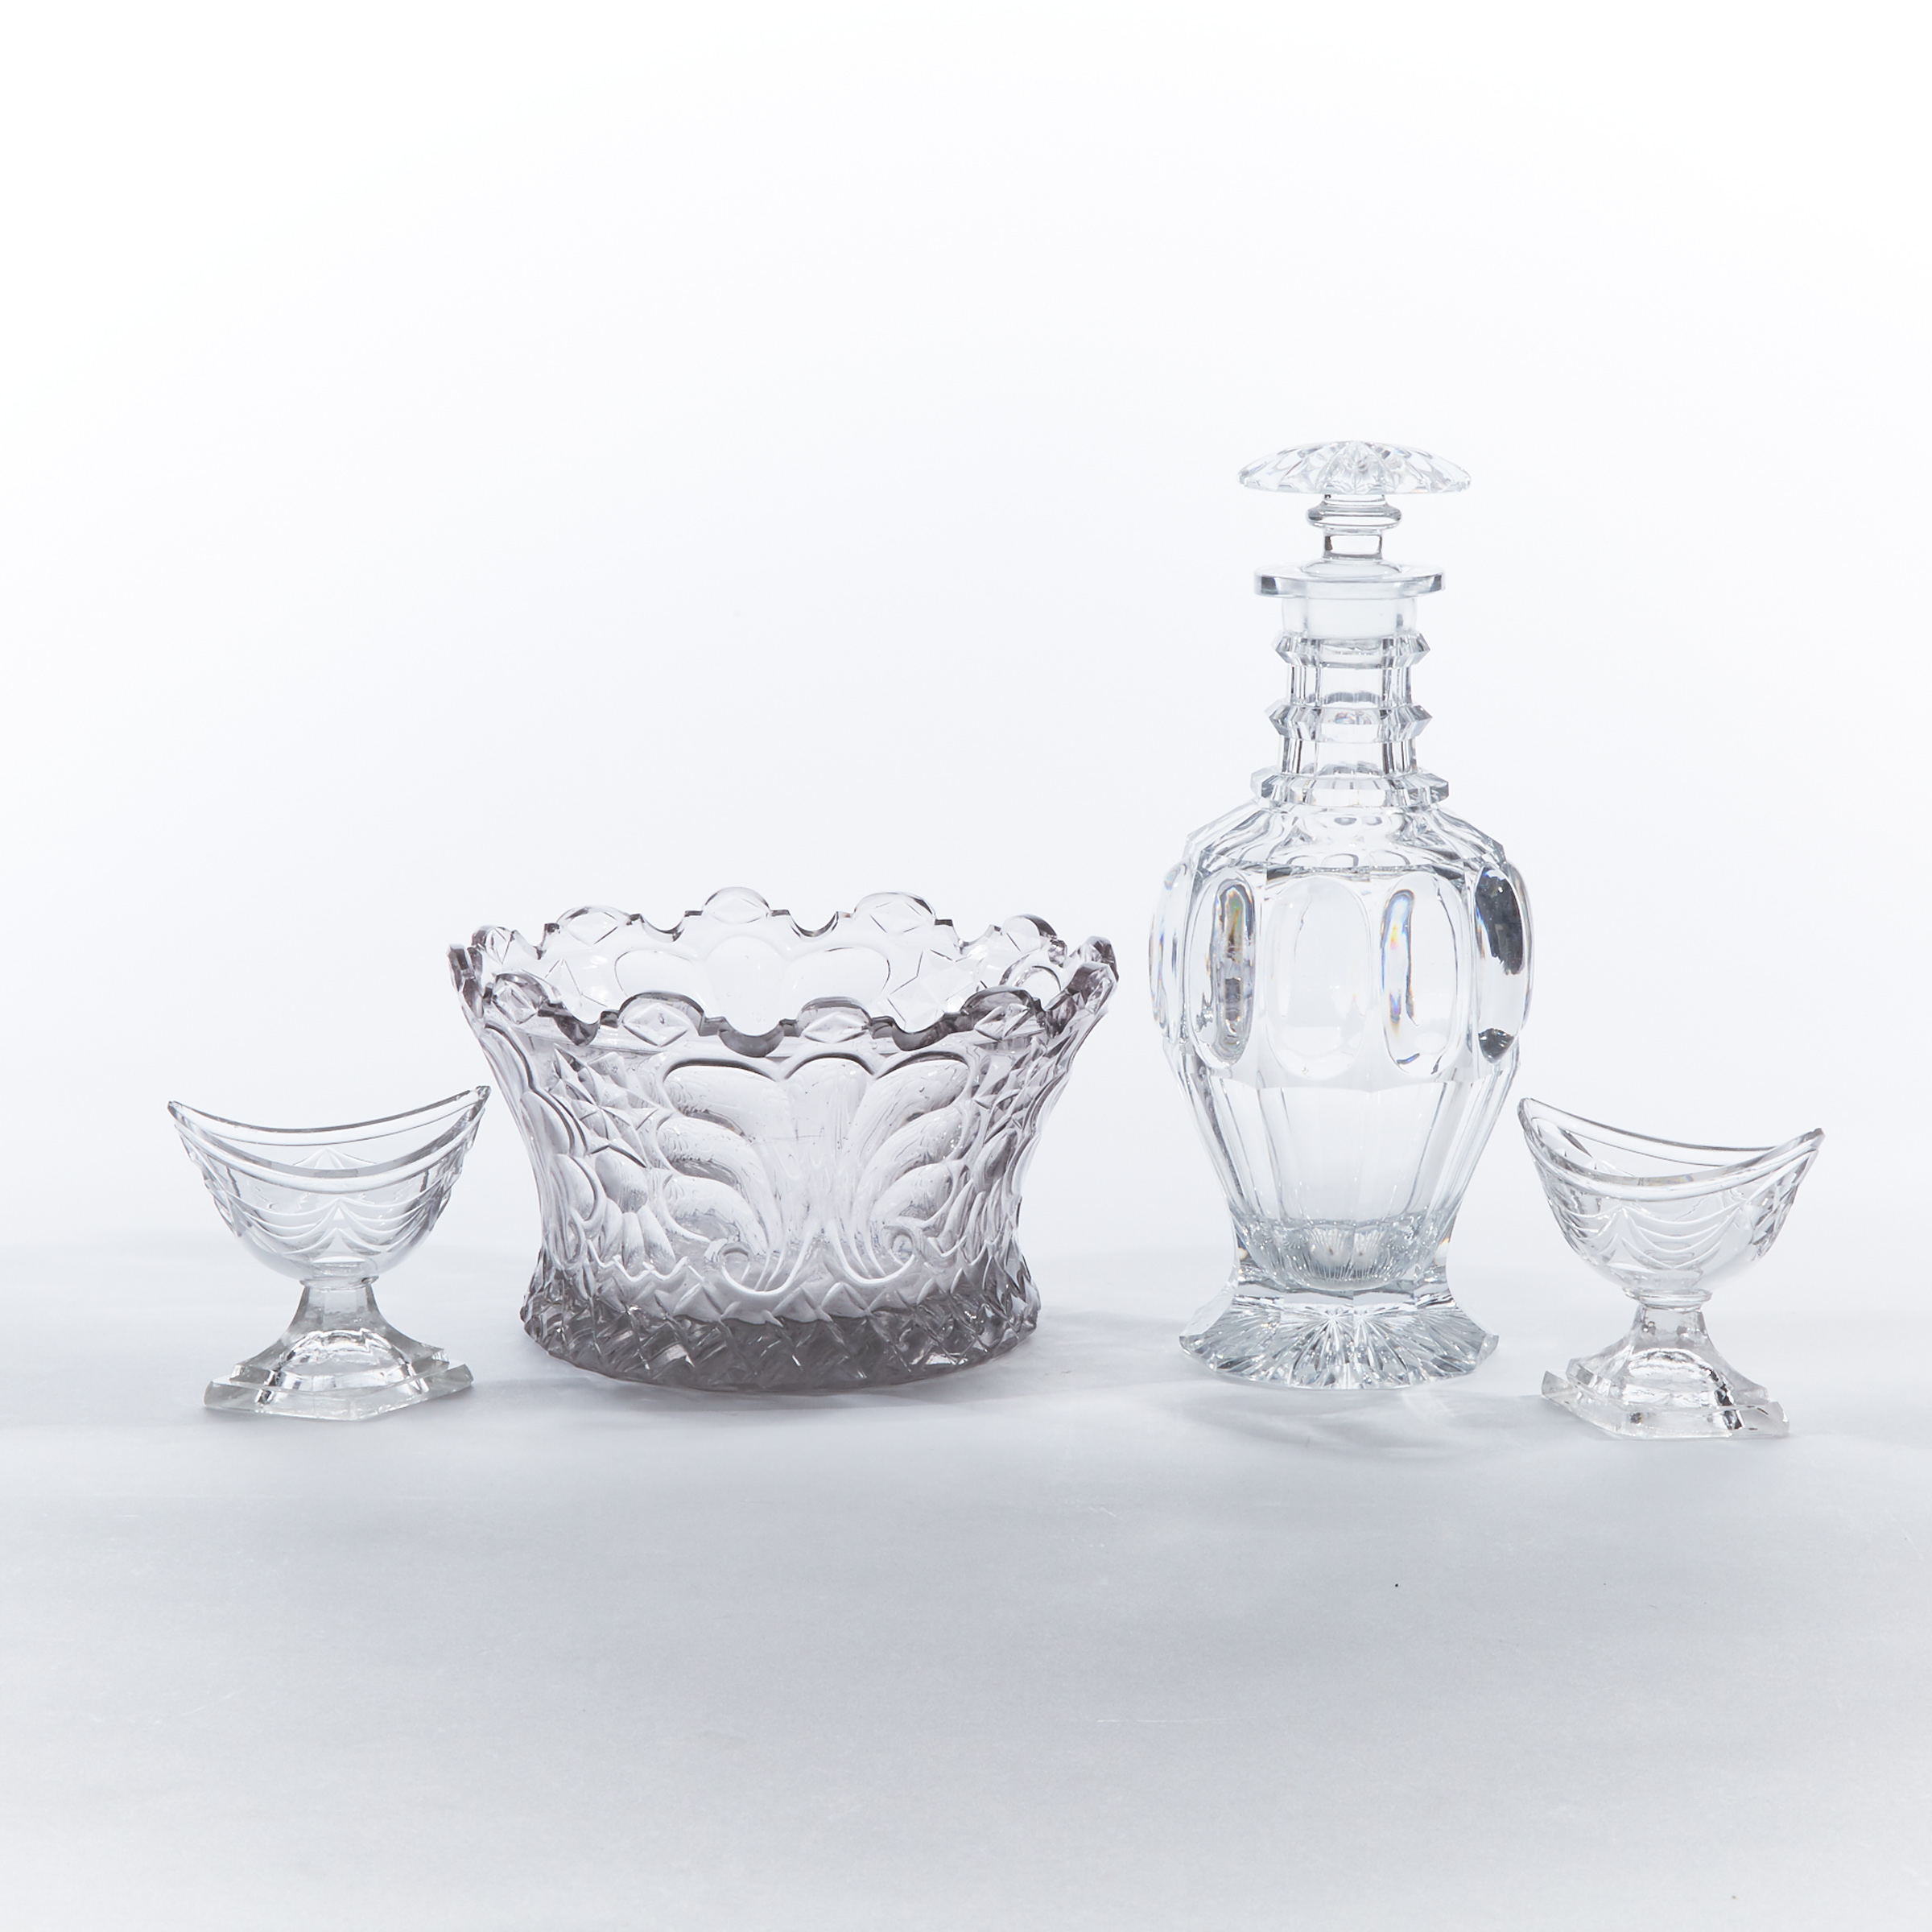 Pair of Anglo-Irish Cut Glass Salt Cellars and Decanter together with a Continental Cut Glass Bowl, 18th/19th century